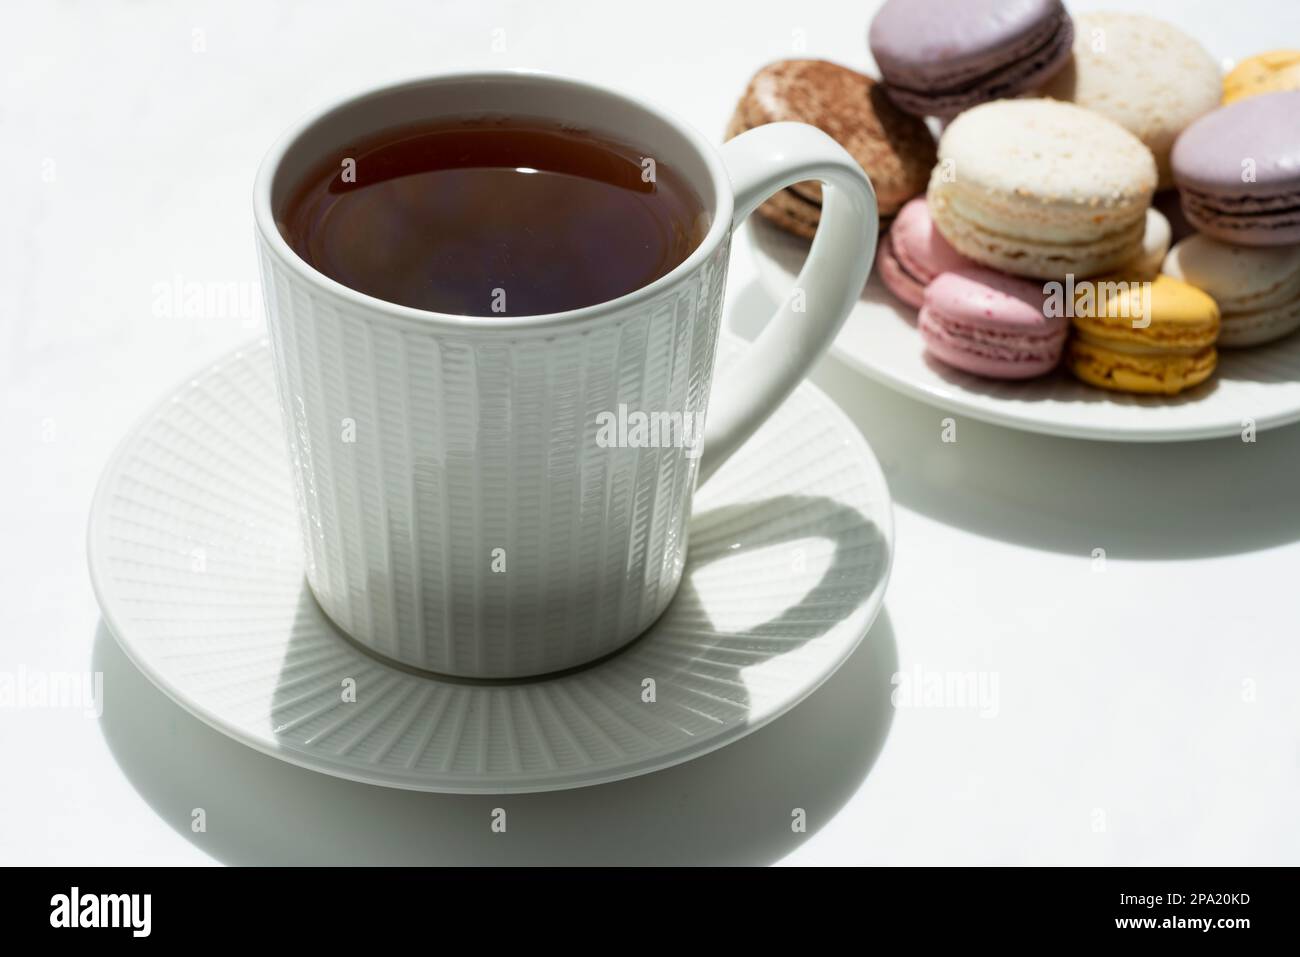 Tea time. Cup of tea with a teapot and macaroon. Stock Photo